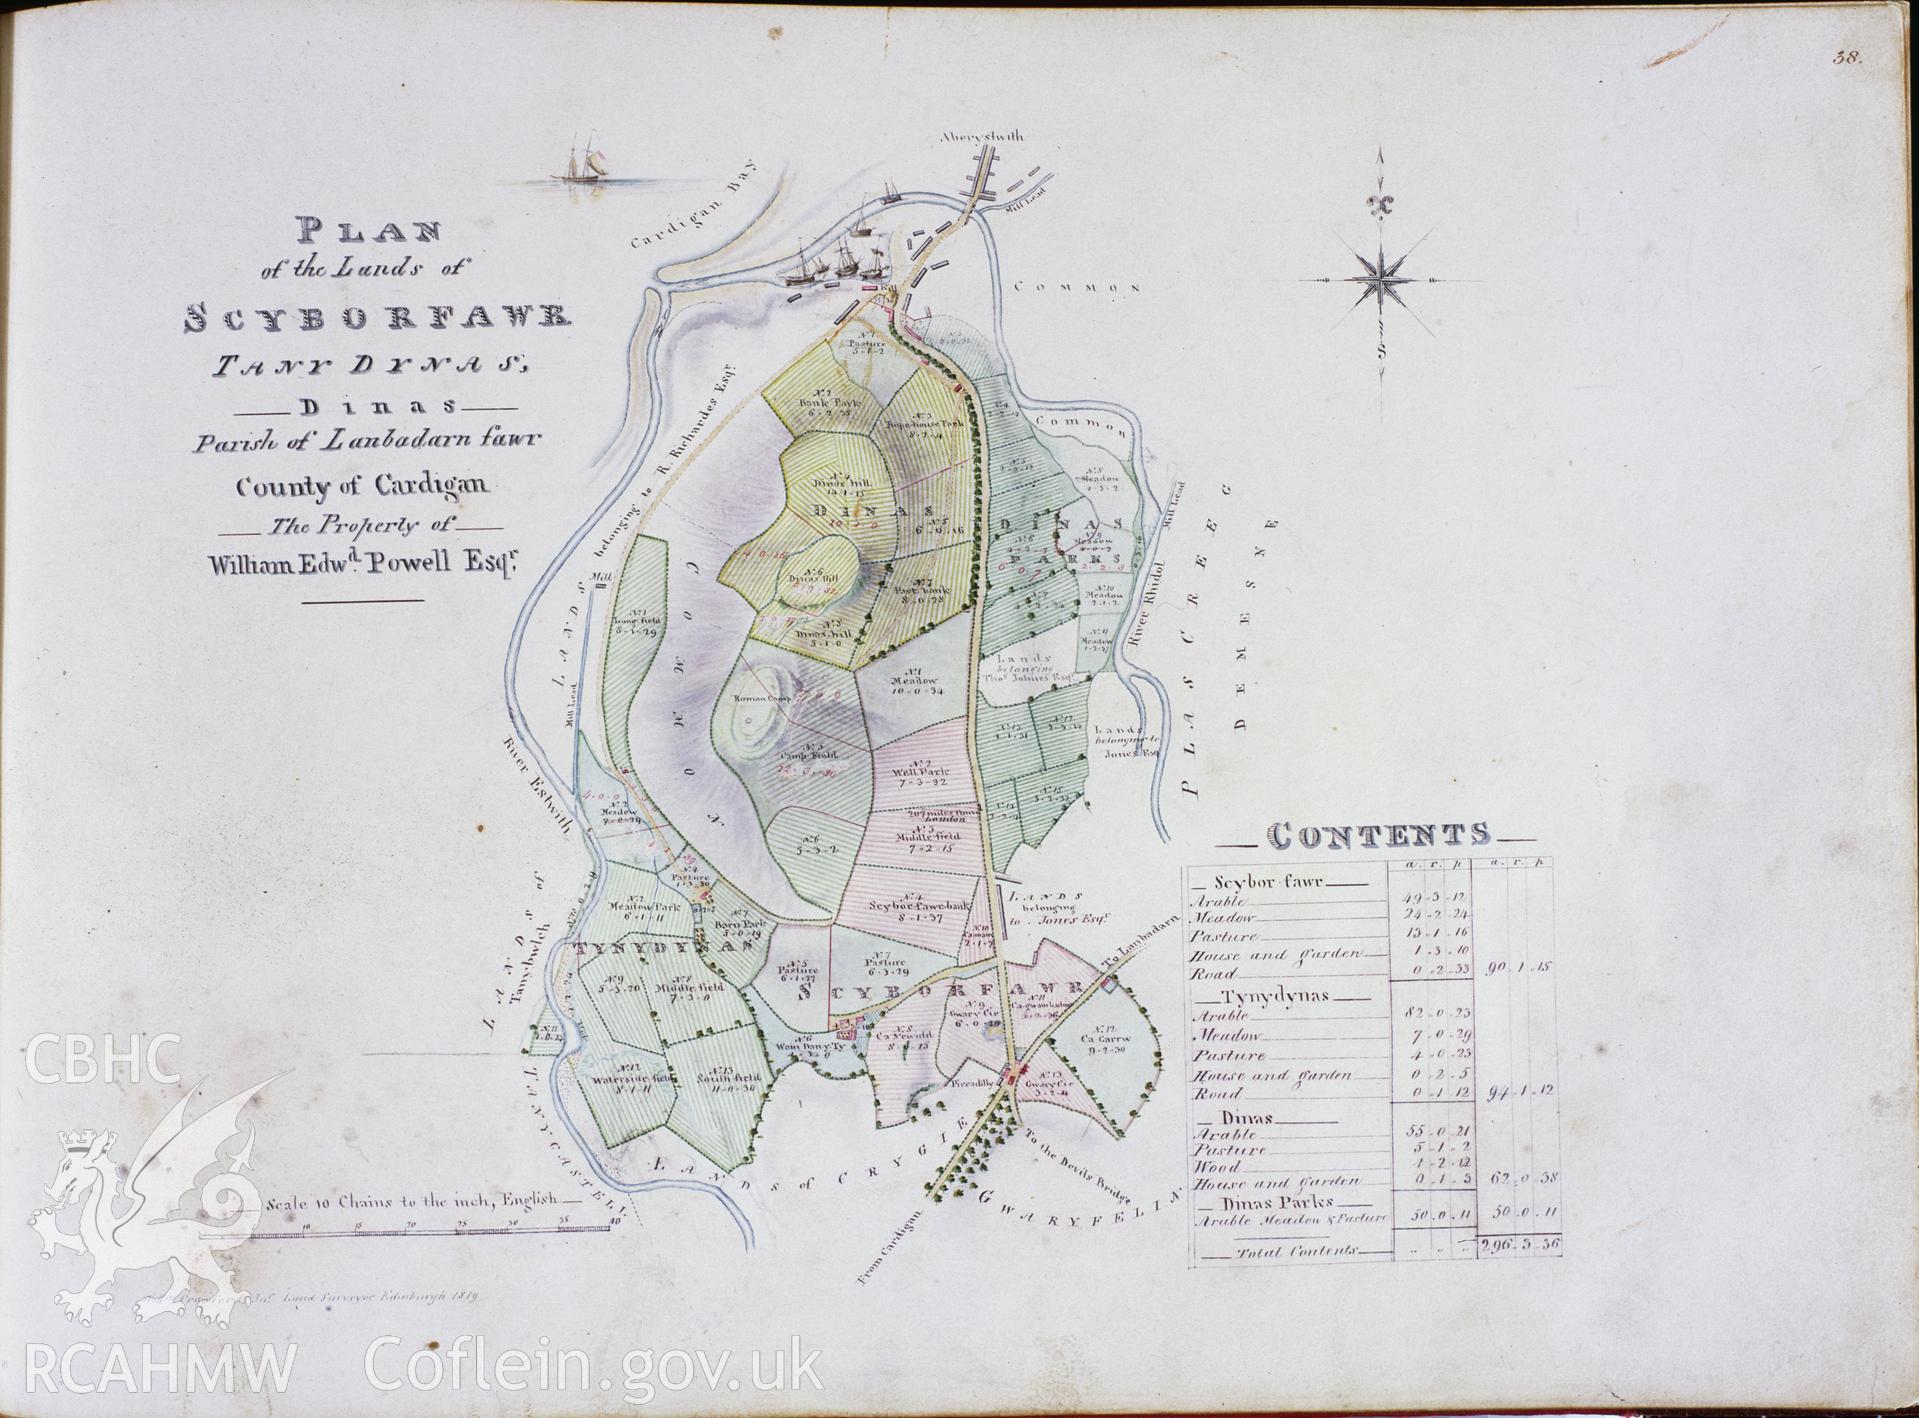 RCAHMW colour transparency of a coloured drawing showing plan of land ownership around Pen Dinas, Aberystwyth c1819